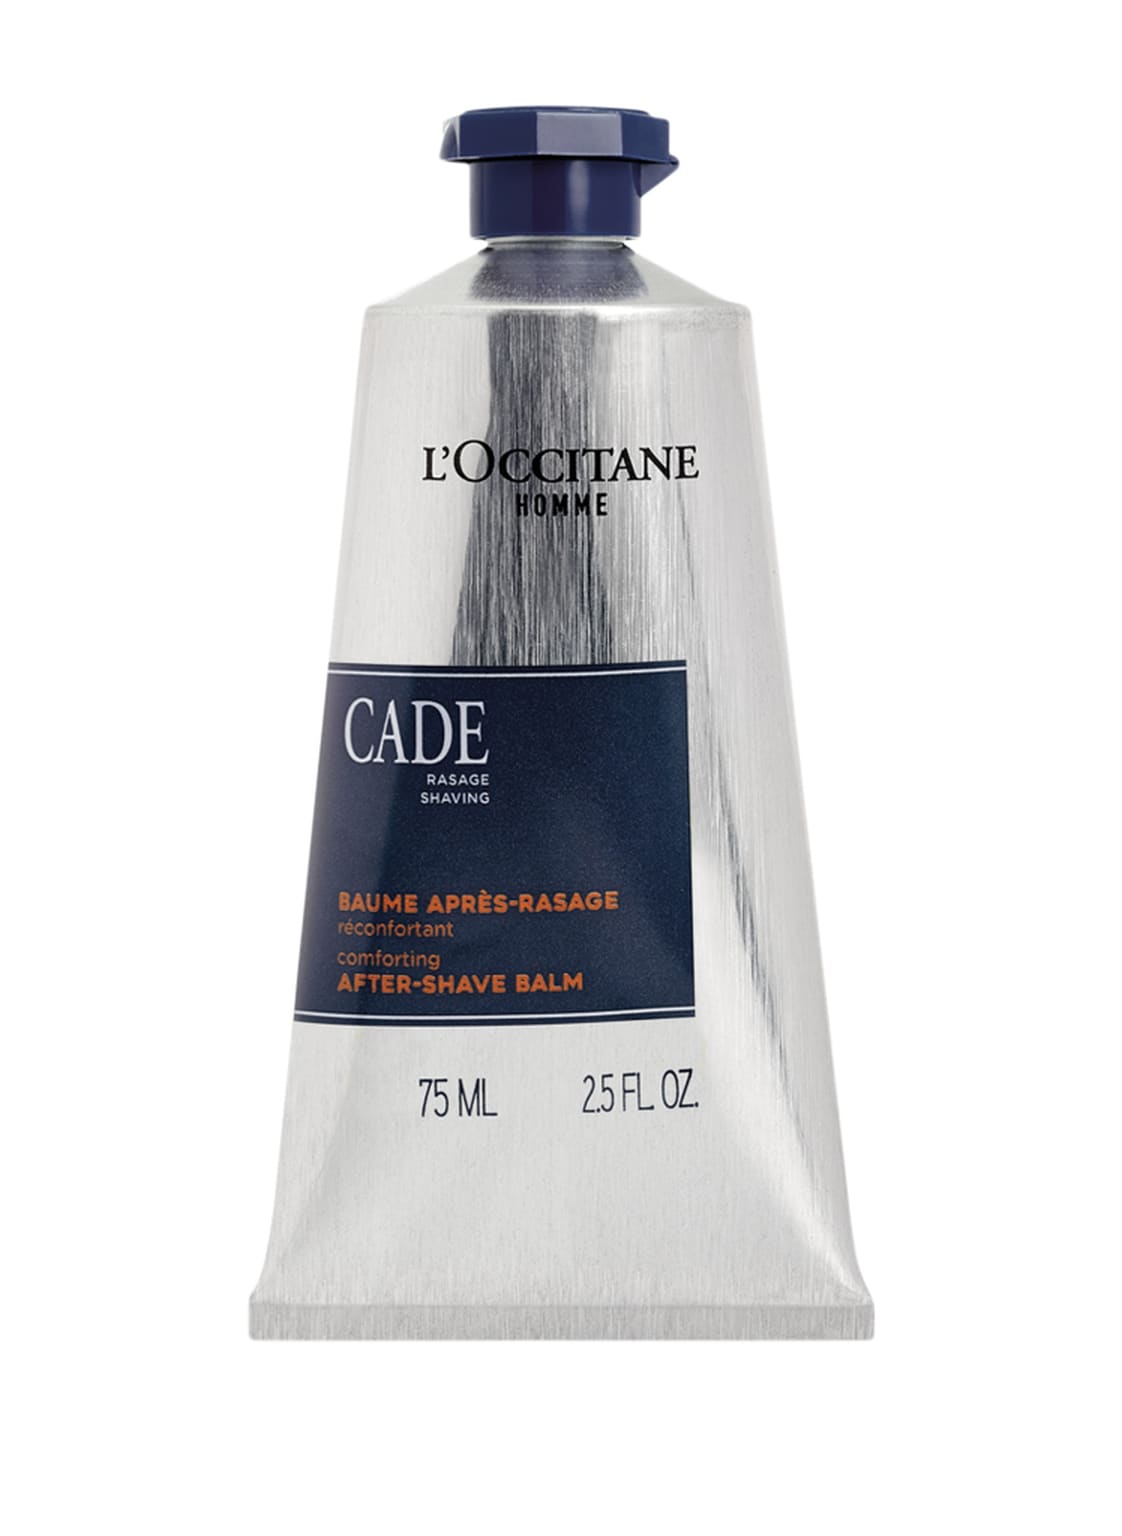 Image of L'occitane Cade After-Shave Blam 75 ml